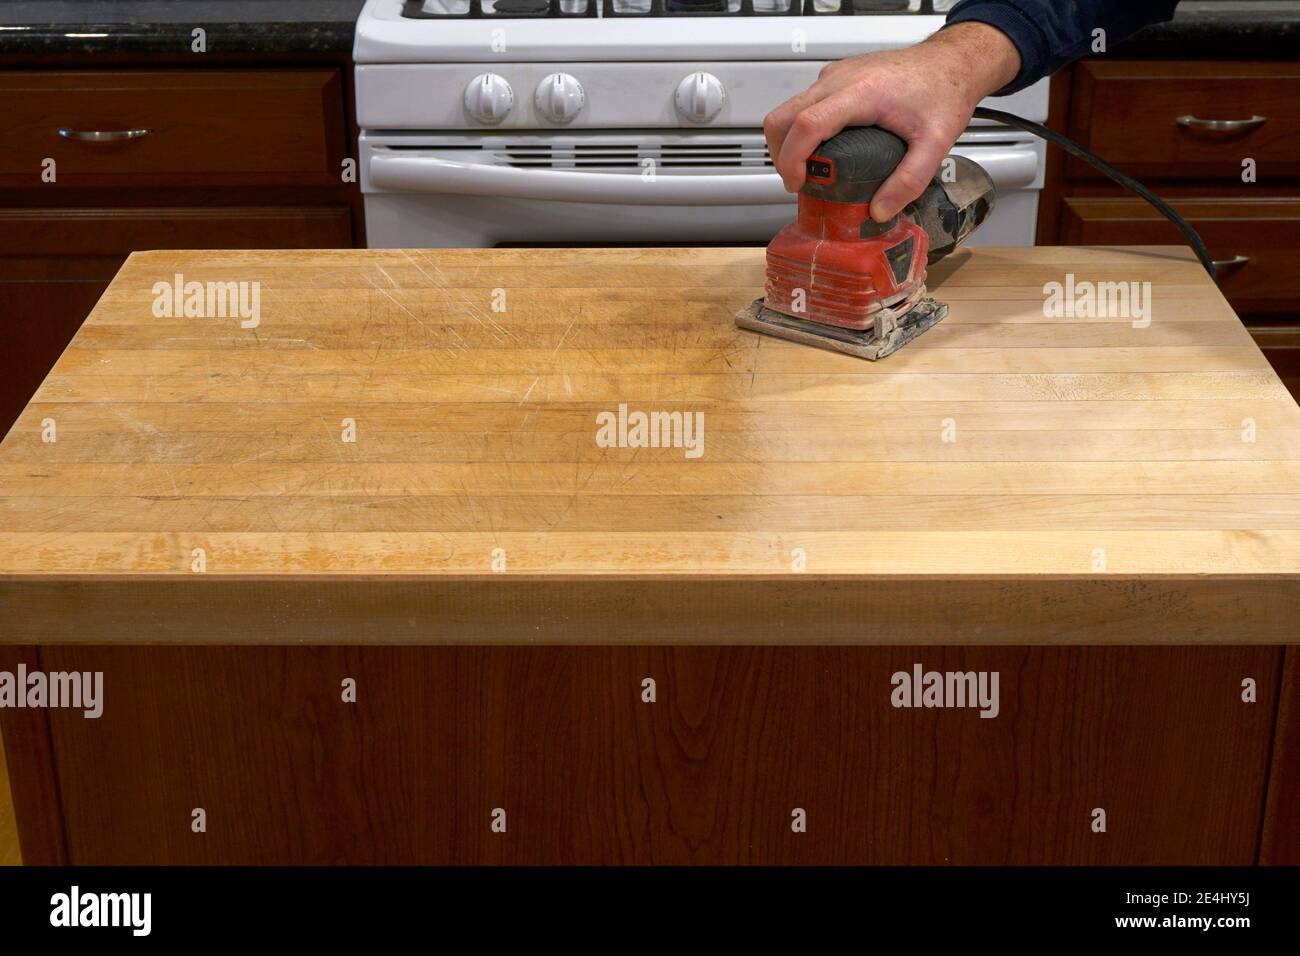 Refinishing a kitchen counter using an electric sander Stock Photo